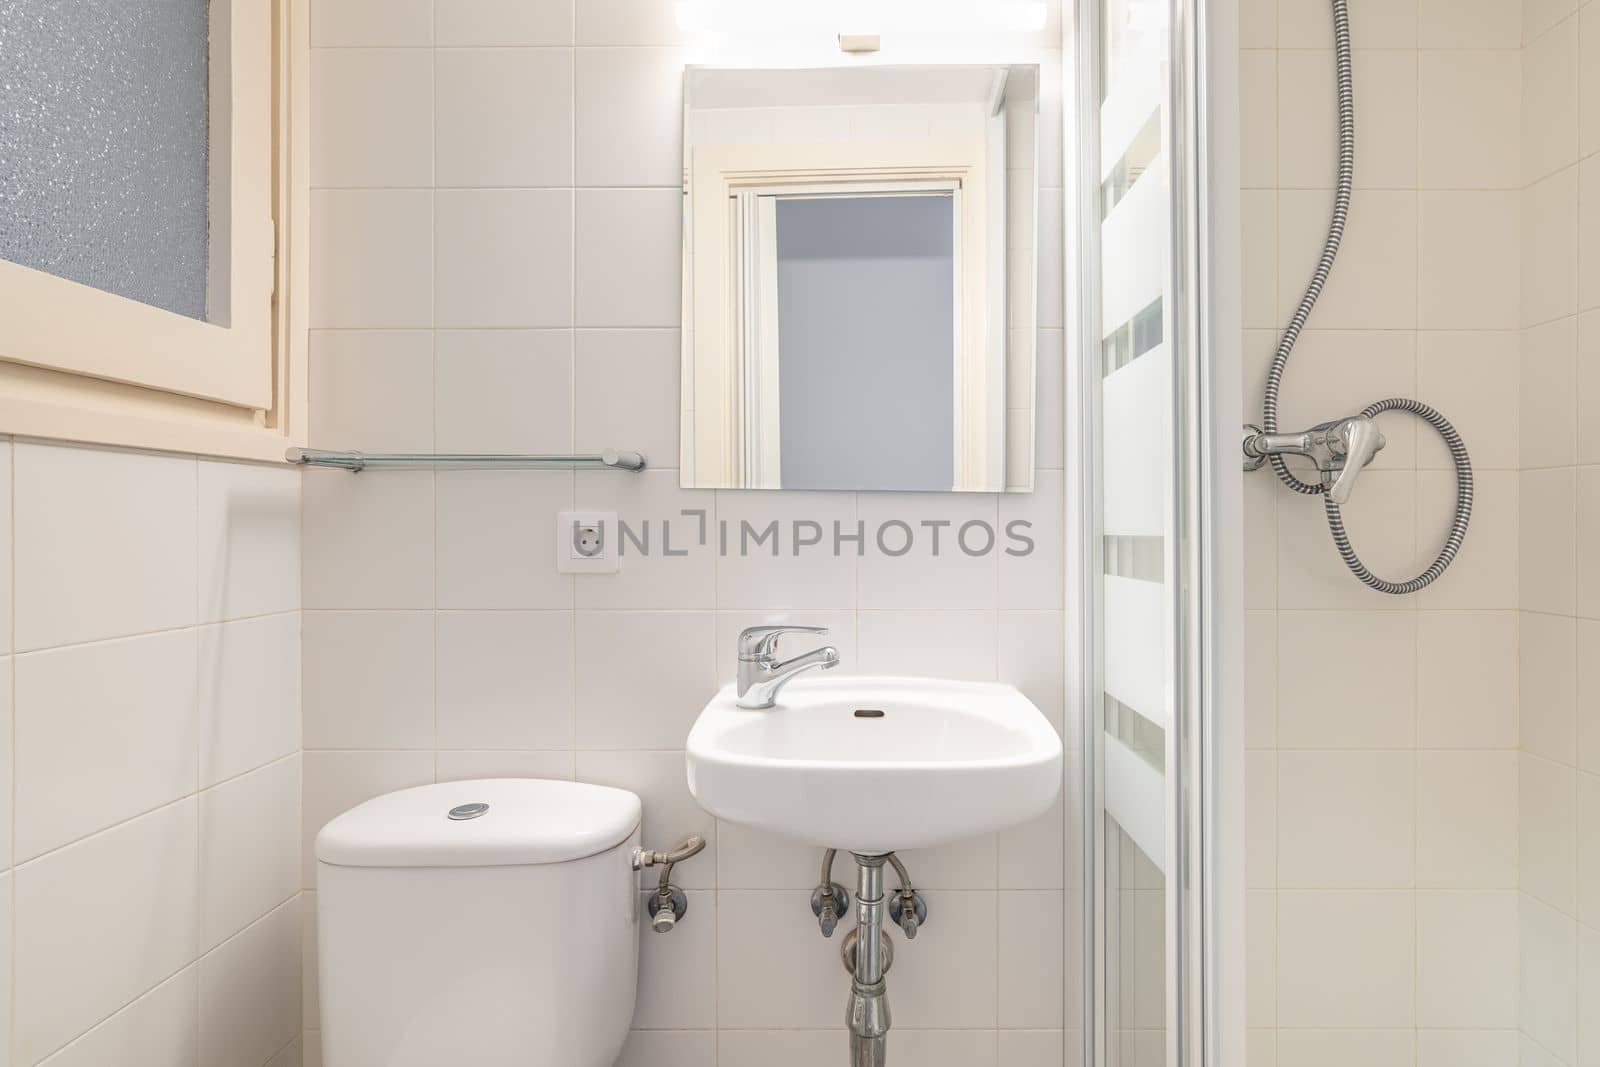 Bathroom with light beige walls. In corner is a shower with glass sliding doors. Vanity sink with white furniture. Mirror is illuminated by bright lamps with a reflection of the front door